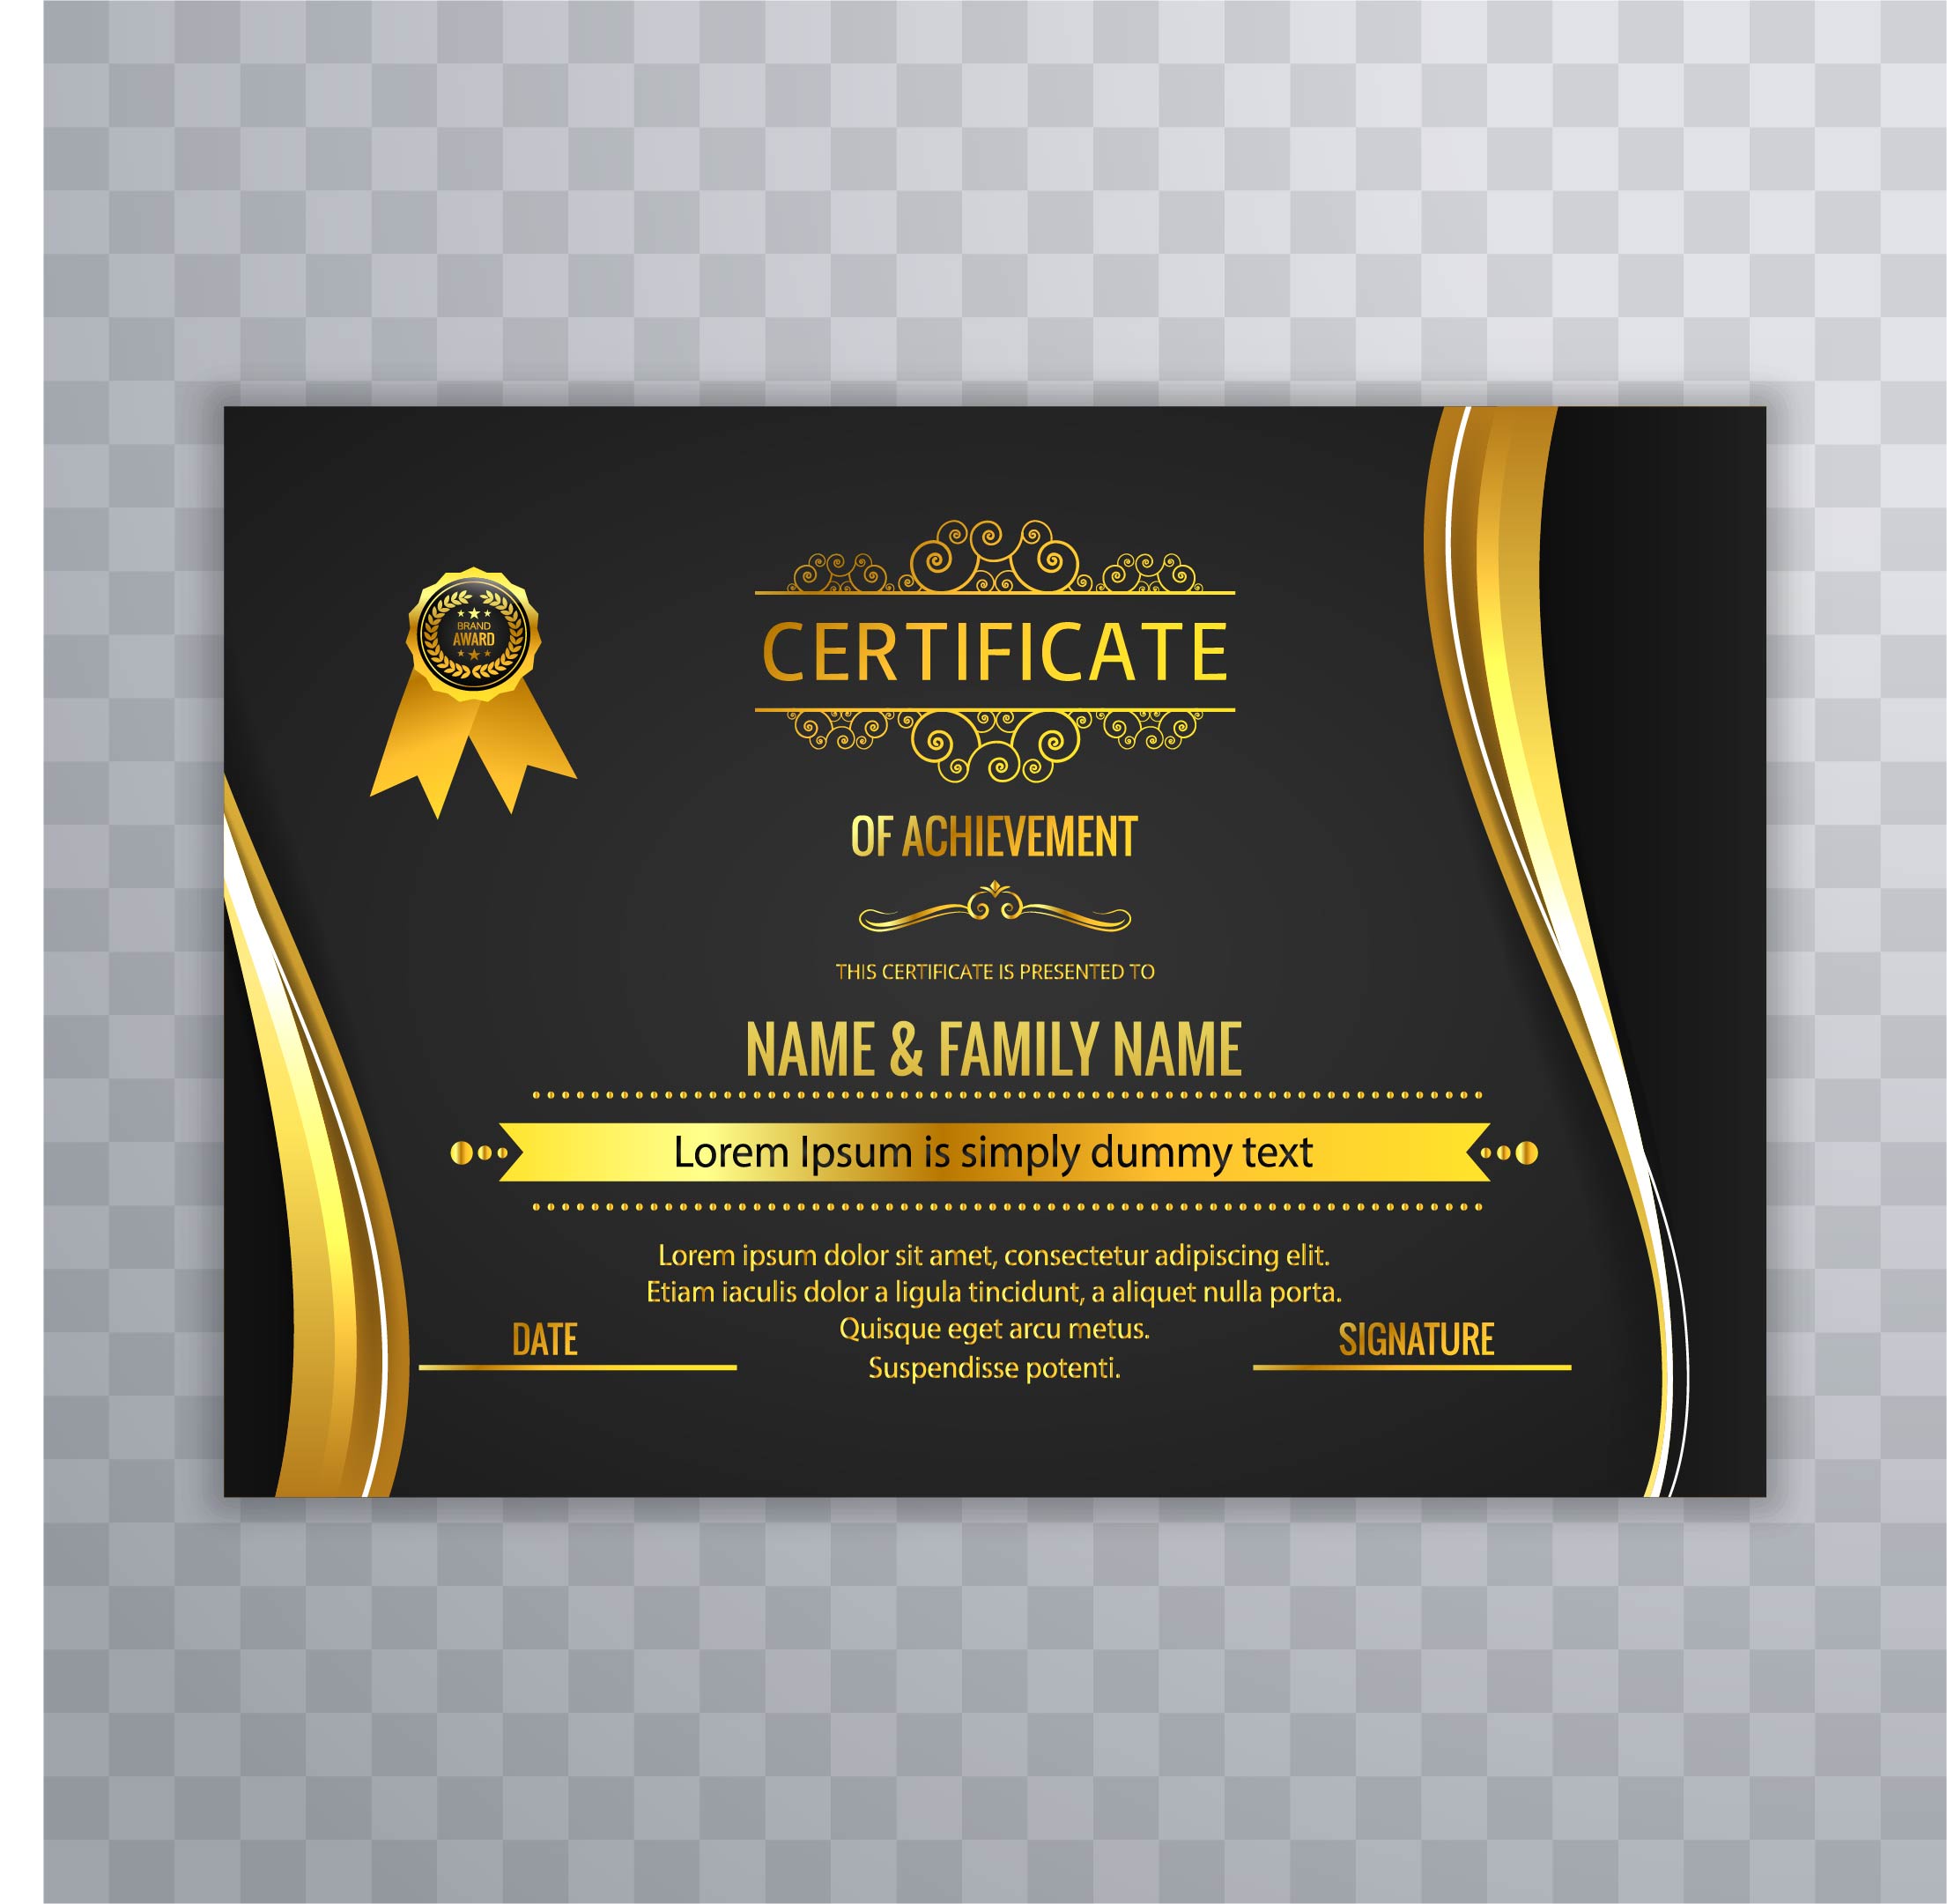 Certificate Design Templates Download Free Powerpoint